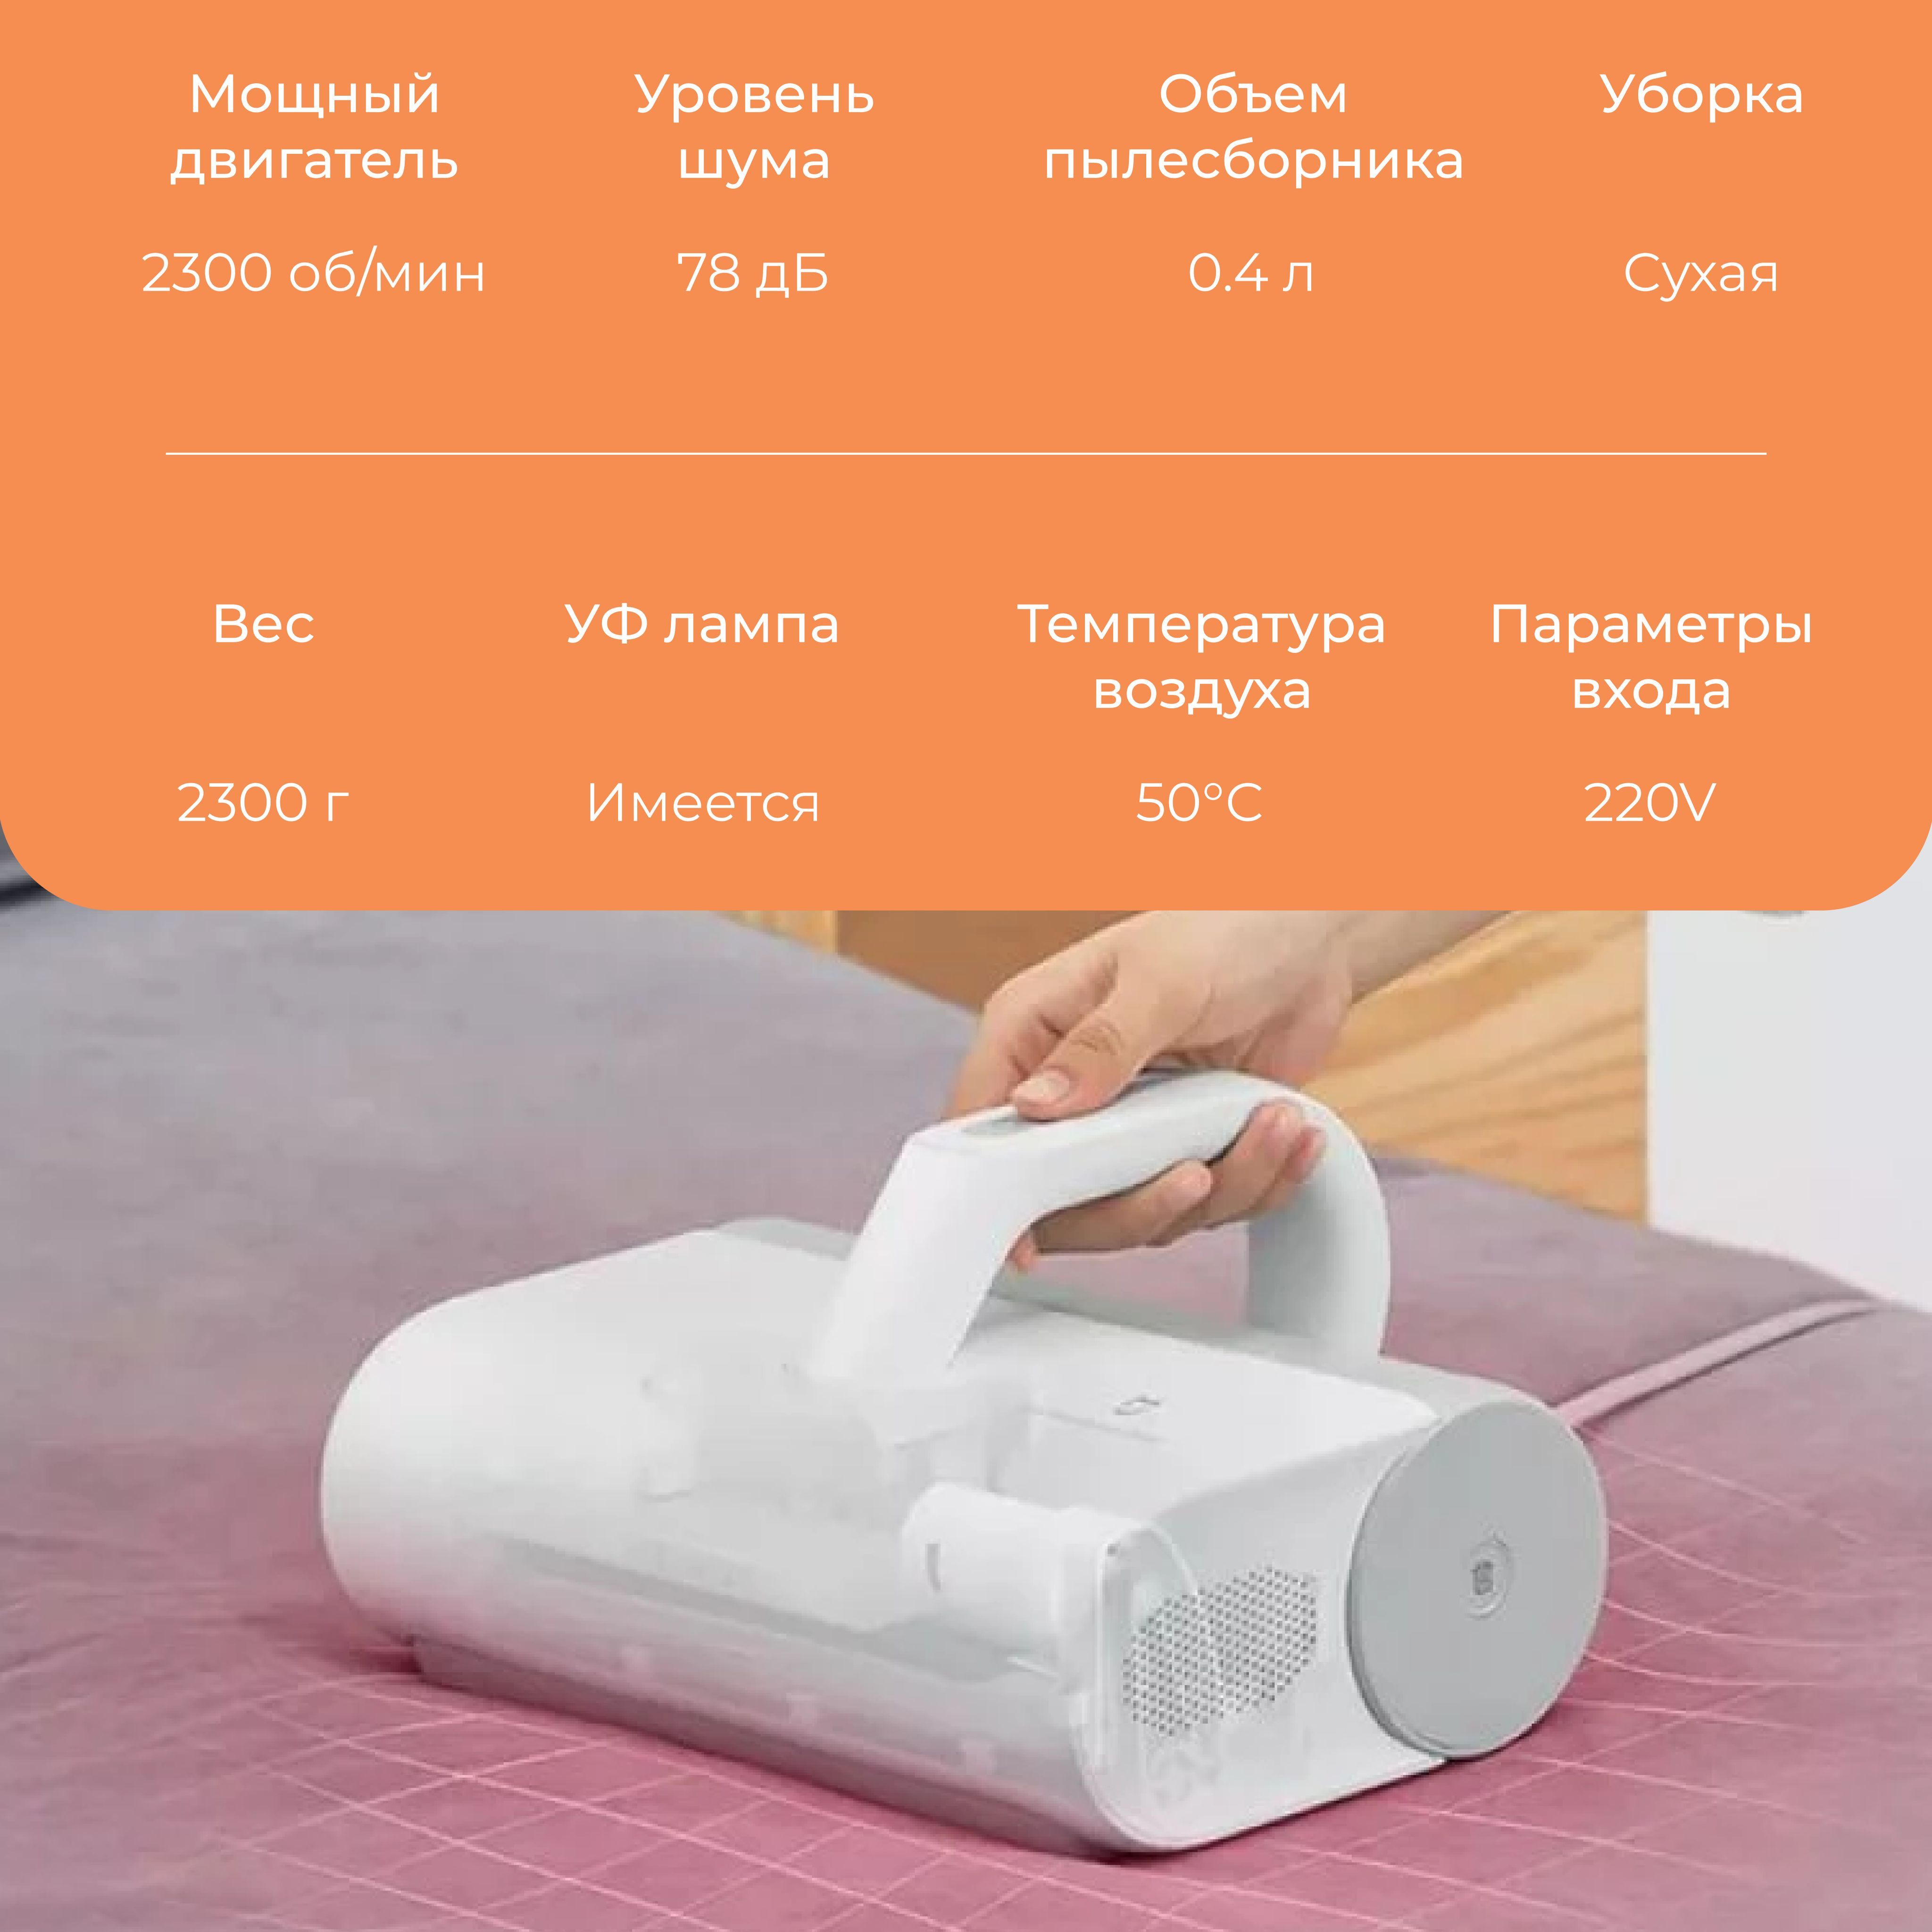 Xiaomi dust mite vacuum cleaner mjcmy01dy. Пылесос Xiaomi (mjcmy01dy). Xiaomi Dust Mite Vacuum. Xiaomi Dust Mite Vacuum вилка. Xiaomi Mijia Dust Mite Vacuum Cleaner.